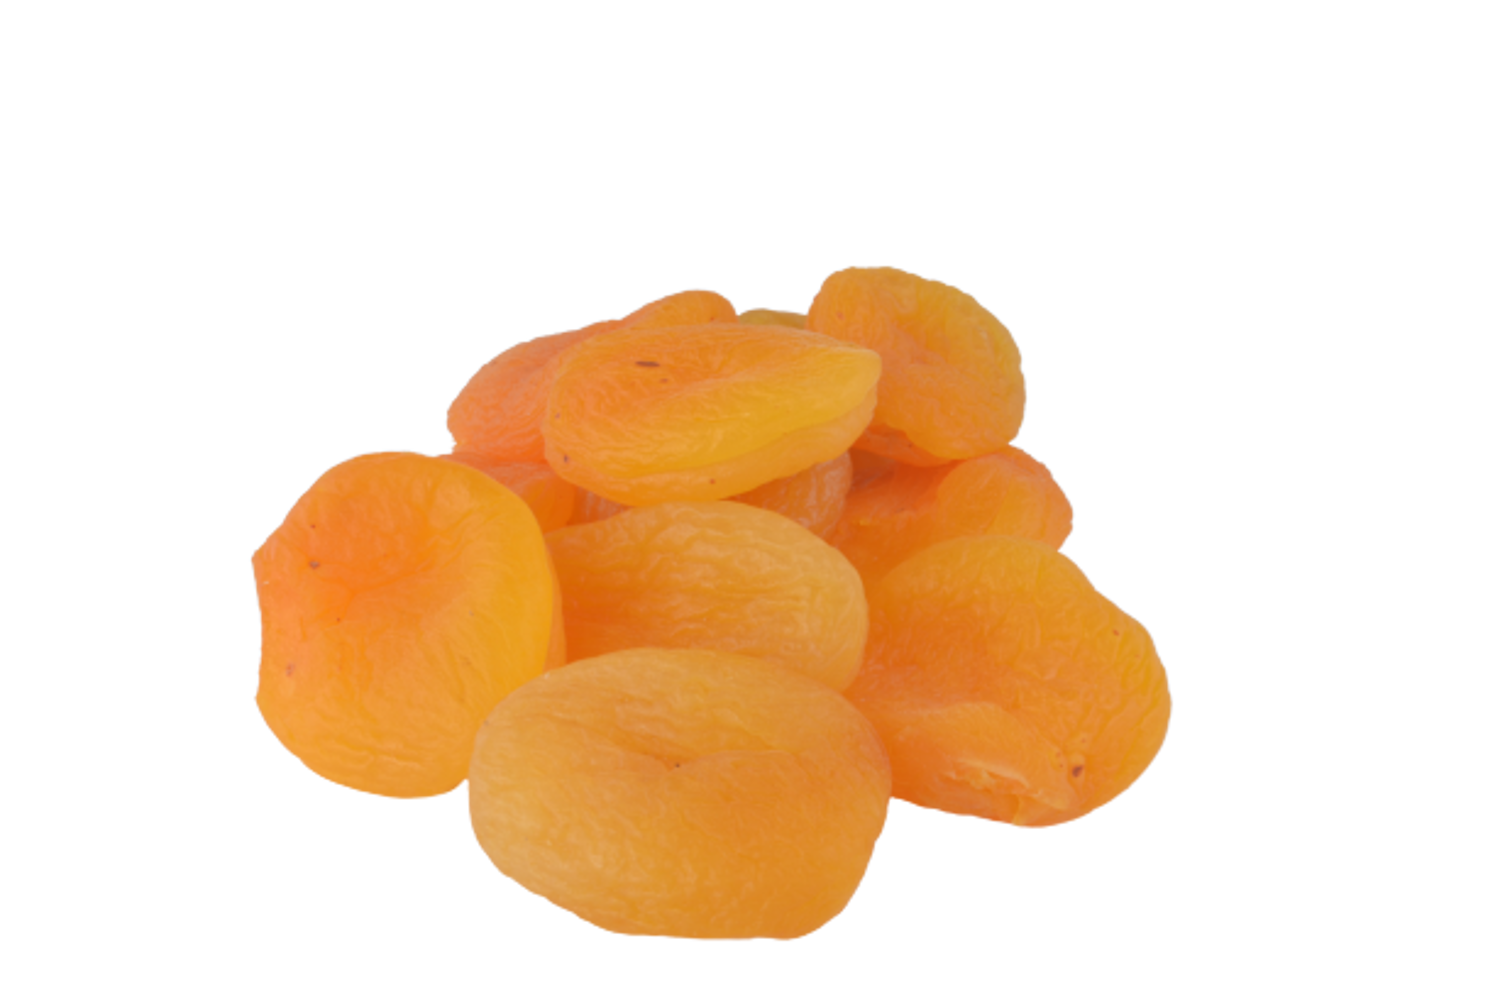 Picture of MEVLANA DRIED APRICOT